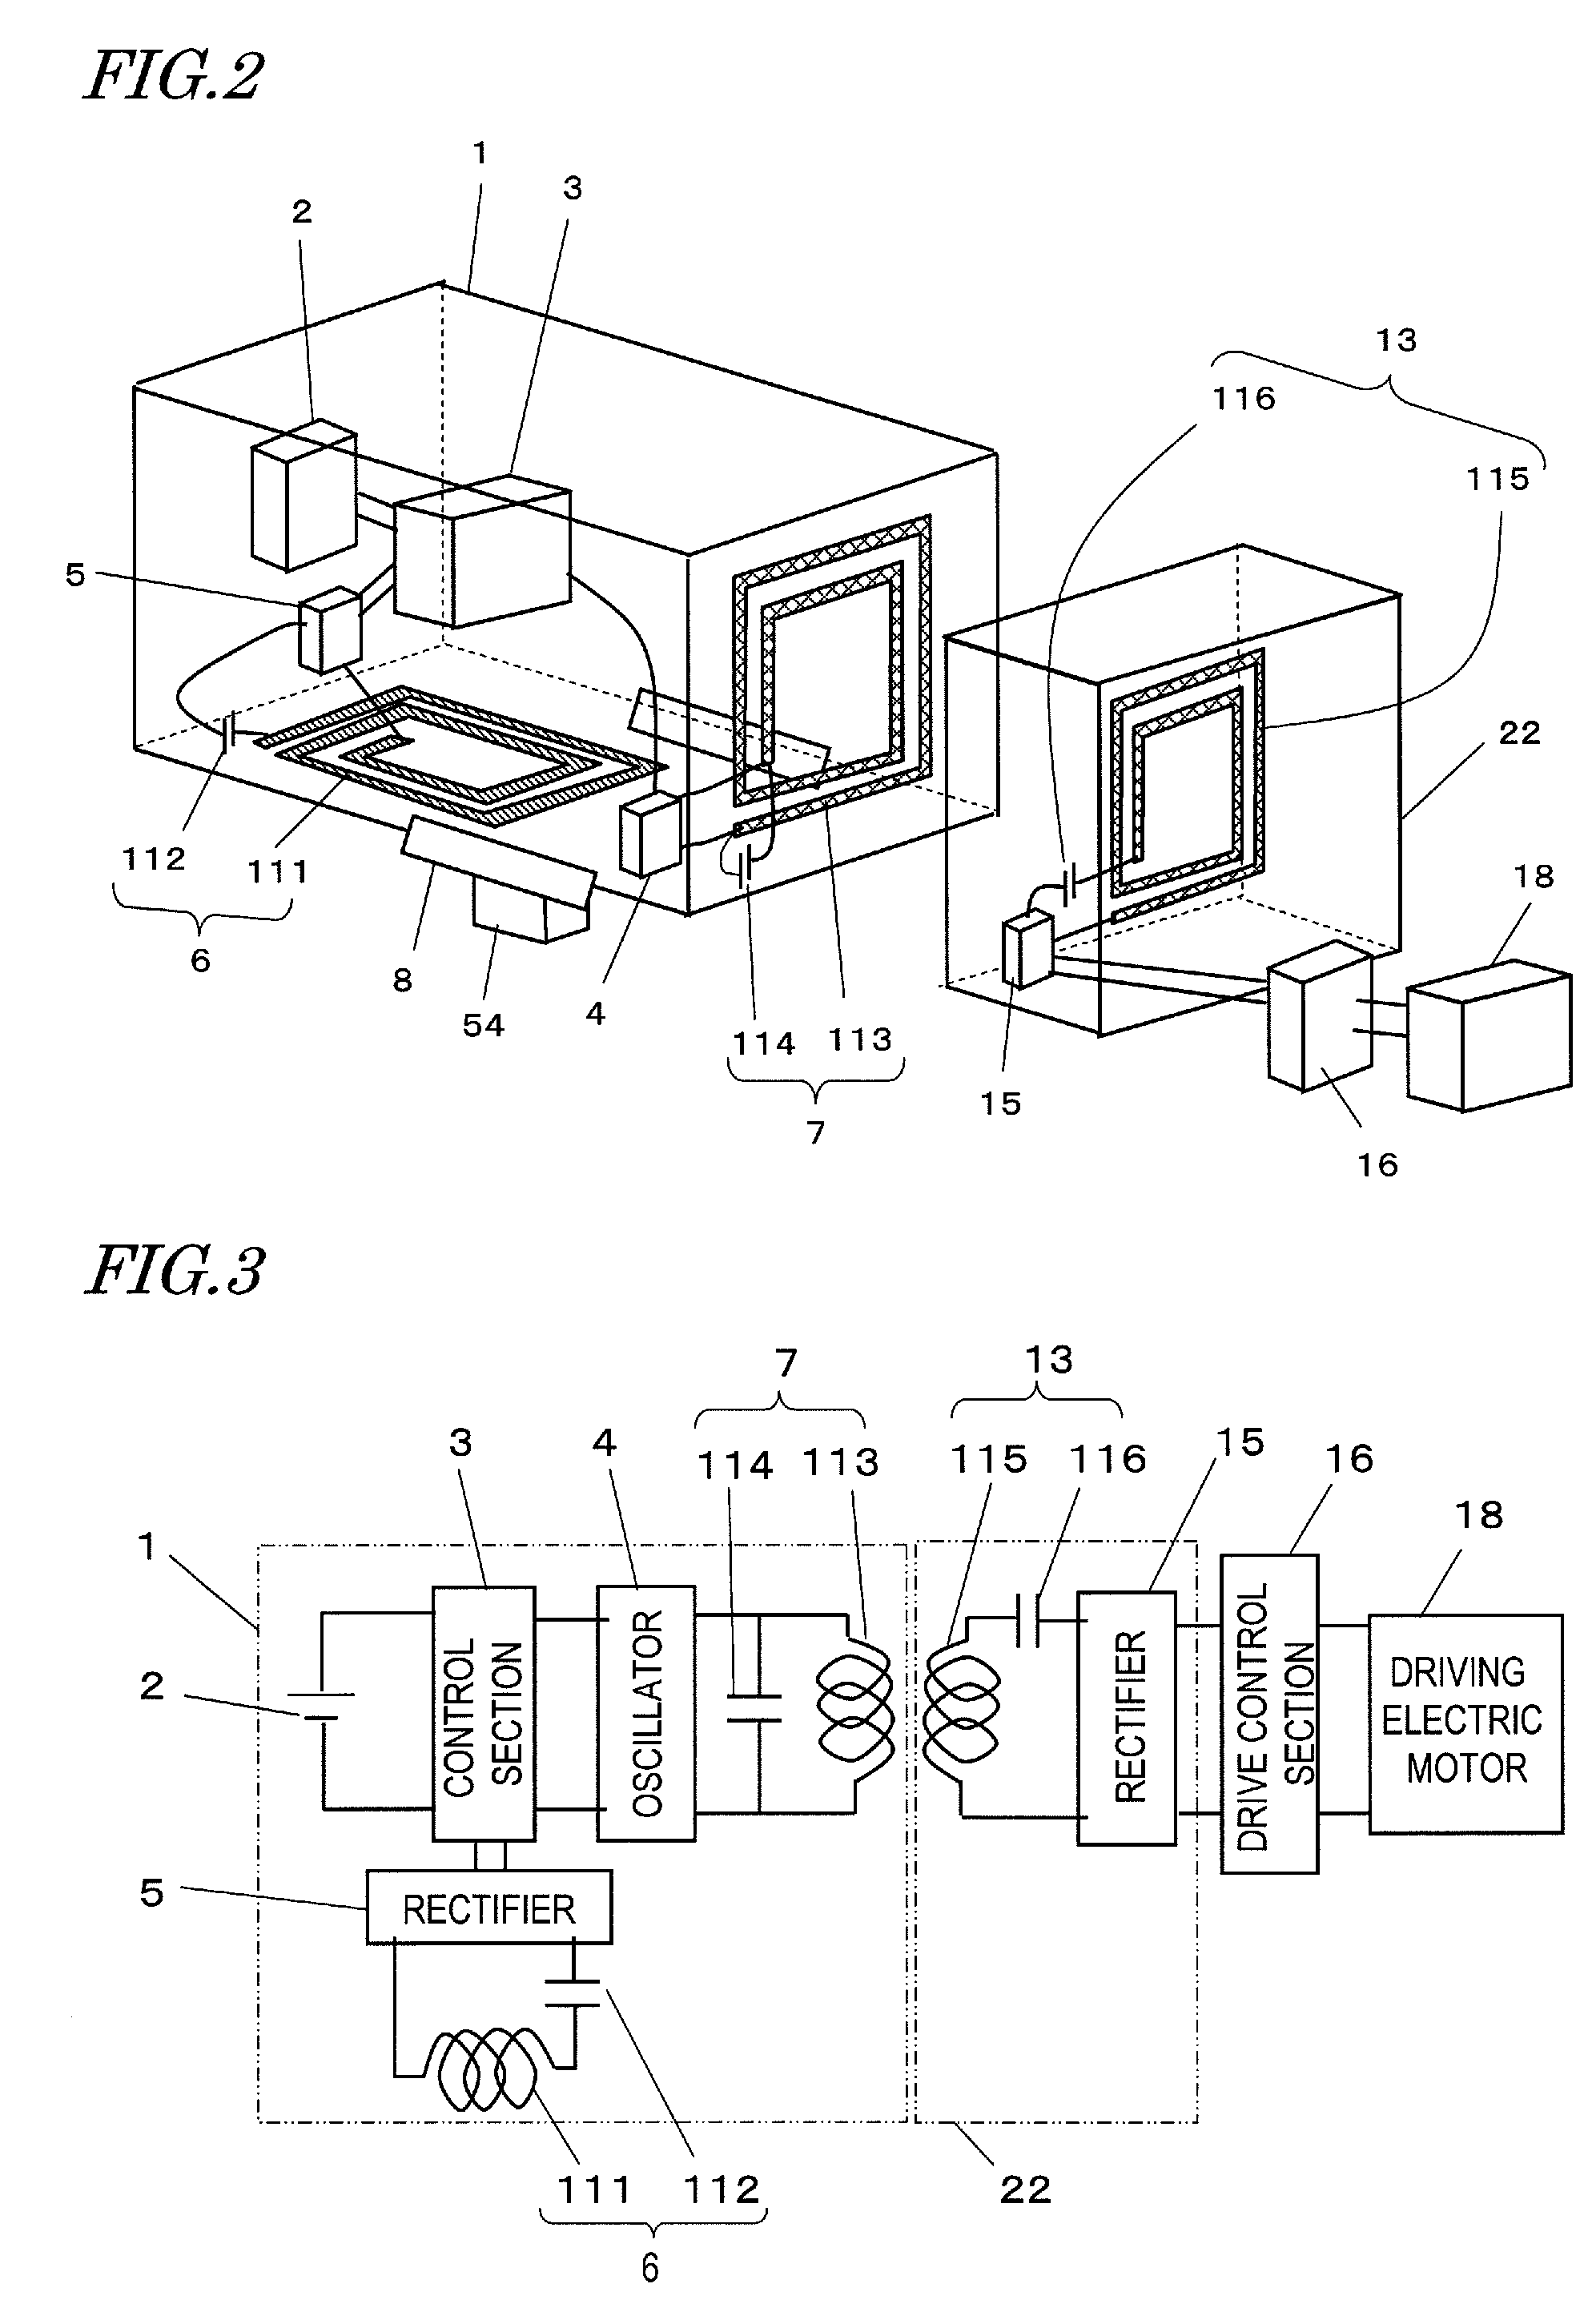 Electric machine and power supply system having battery pack